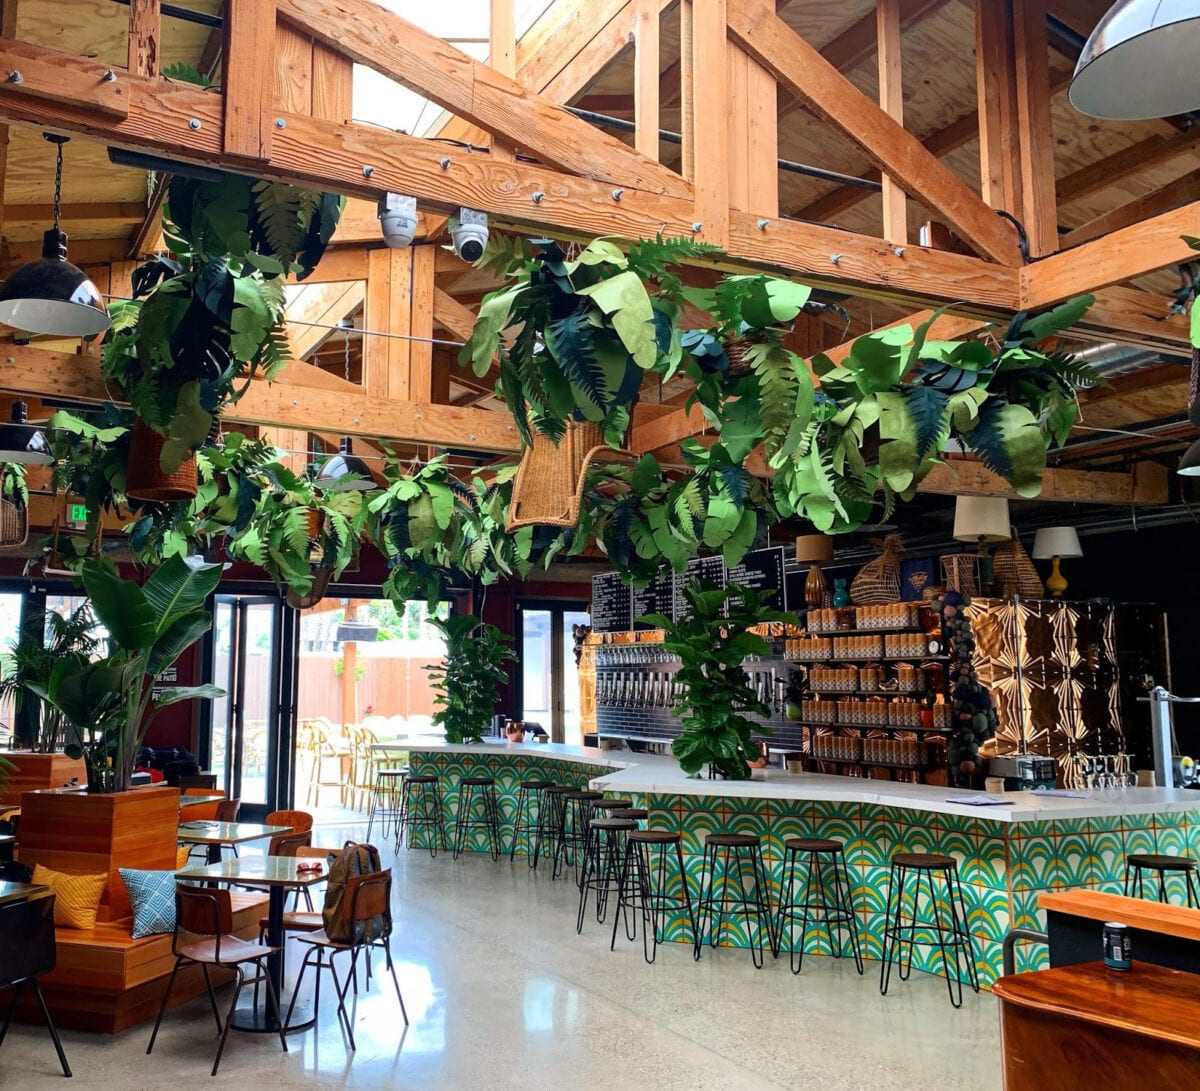 Modern Times Brewery Santa Barbara. Earthy bar and seating area with lots of greenery.